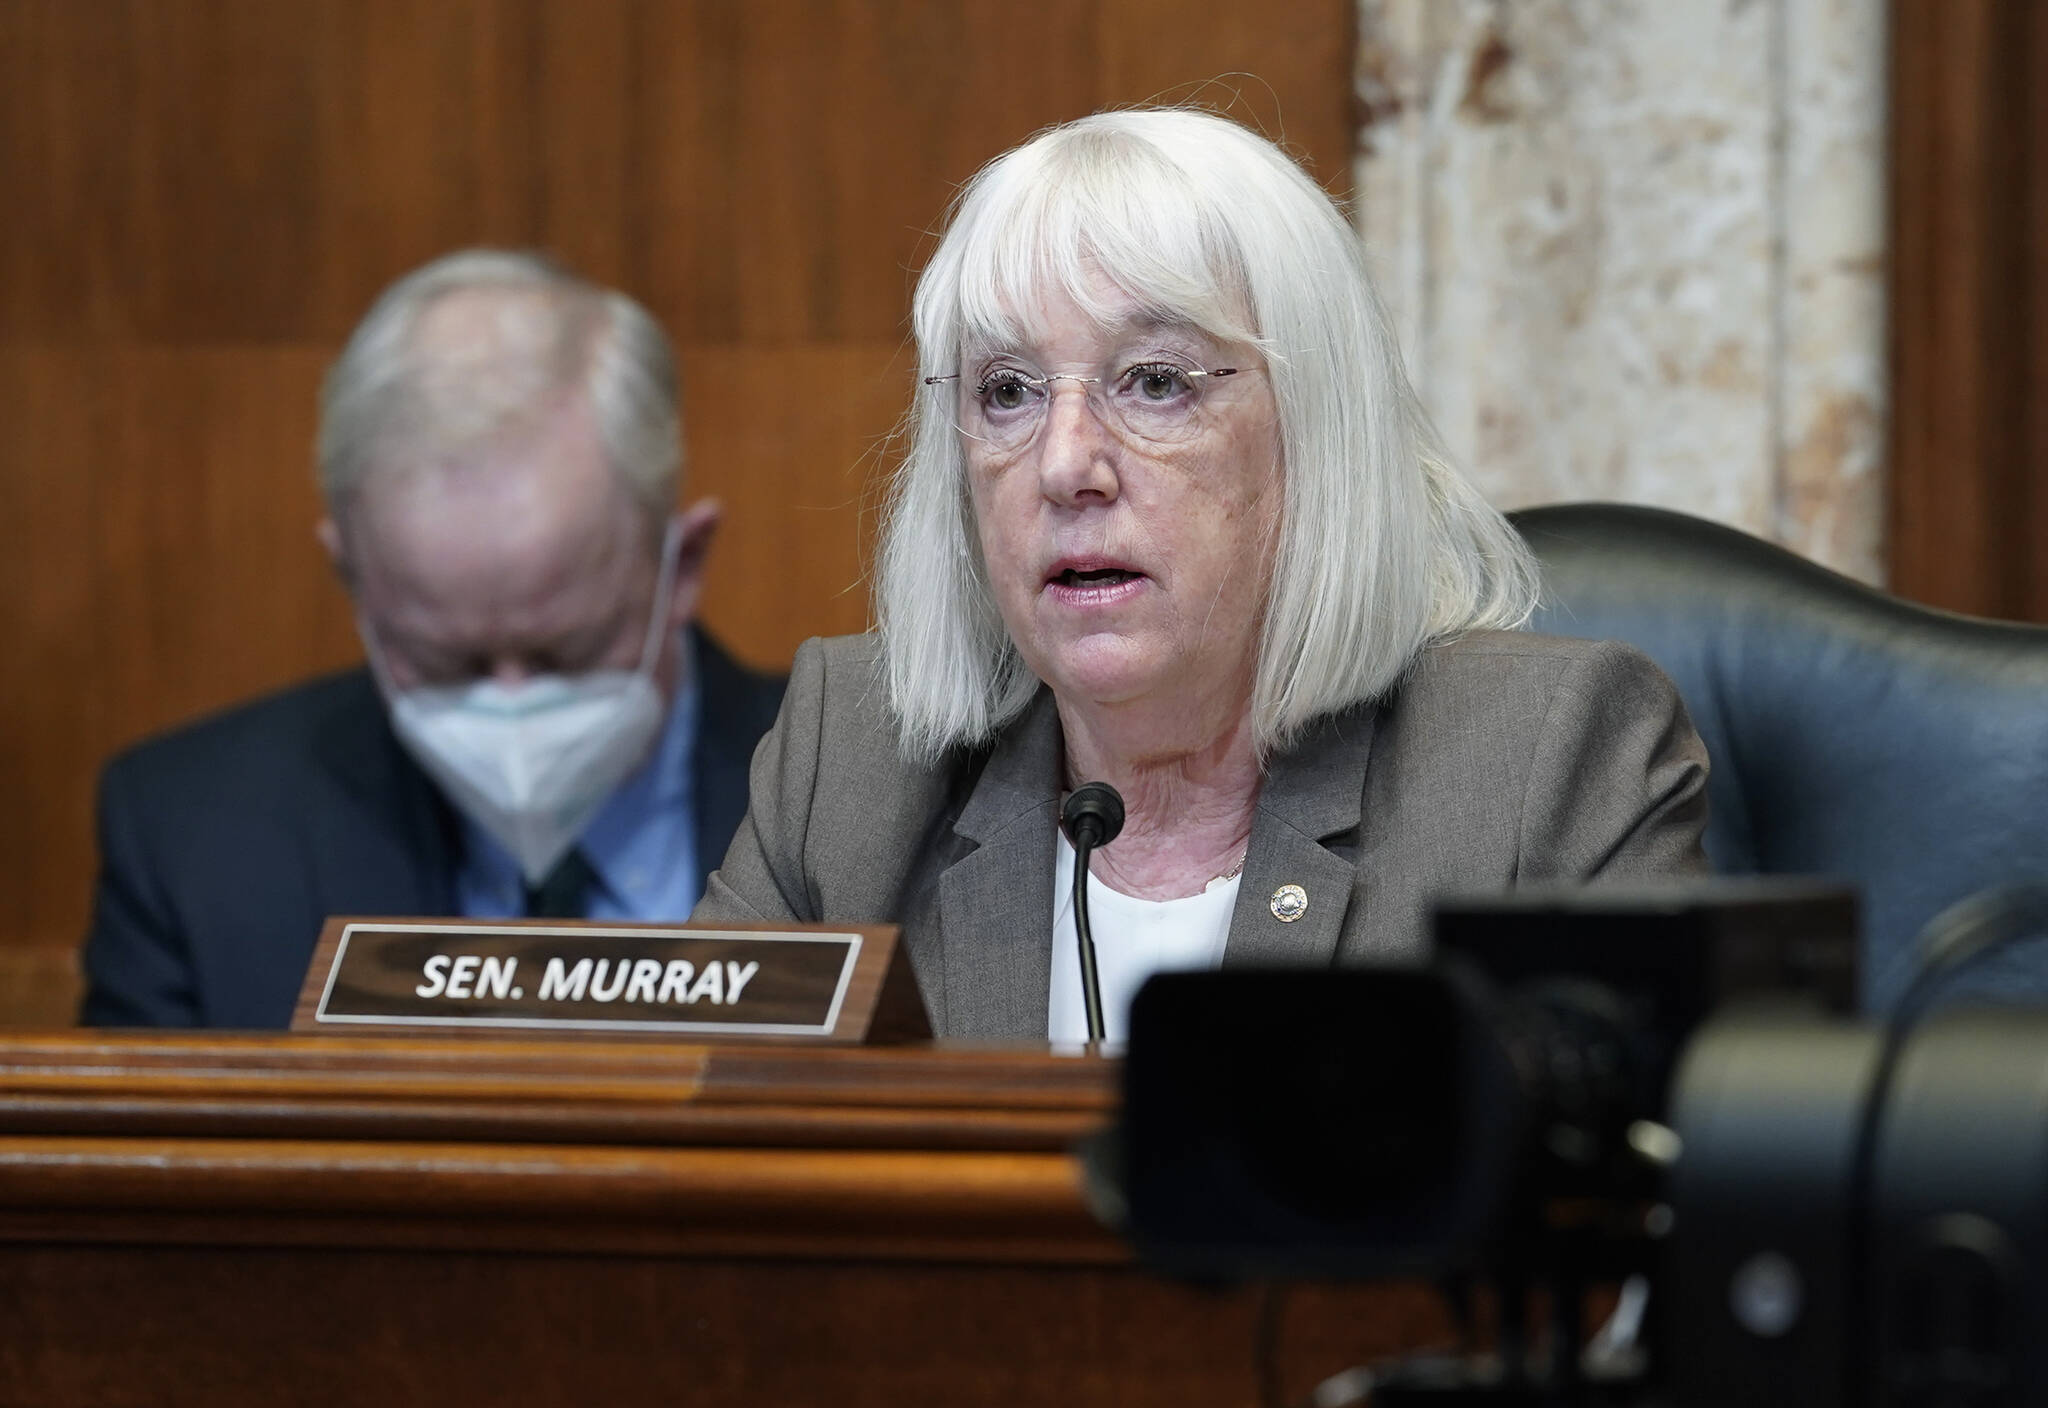 Sen. Patty Murray, D-Wash., speaks during the House Committee on Appropriations subcommittee on Labor, Health and Human Services, Education, and Related Agencies hearing. Murray faces Republican Tiffany Smiley in the November election. (Mariam Zuhaib/The Associated Press, File)